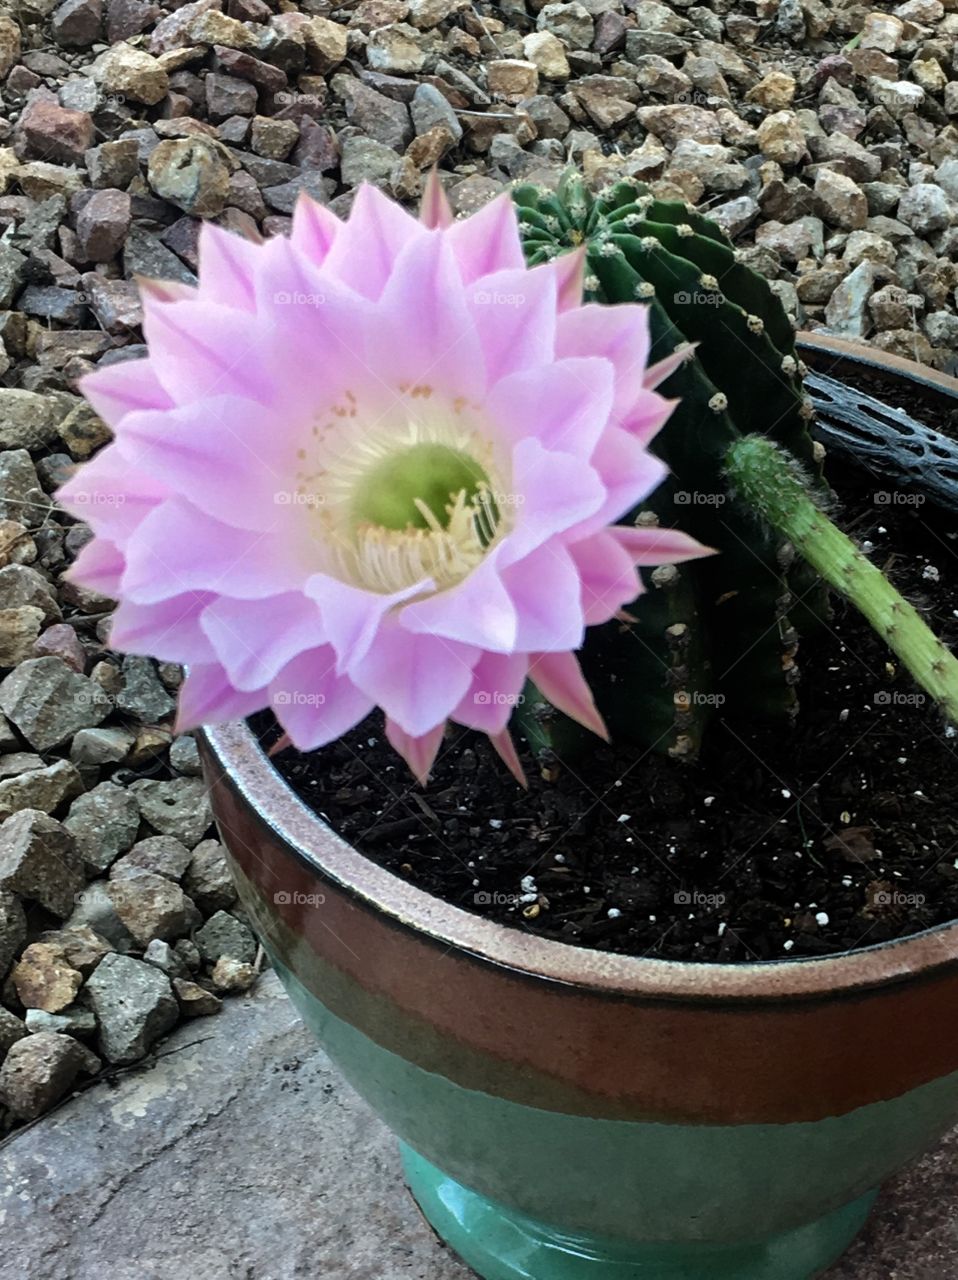 Gorgeous, beautiful, pretty cactus flower blossom in pink and purple with desert rocks in the background, copper and green pot.